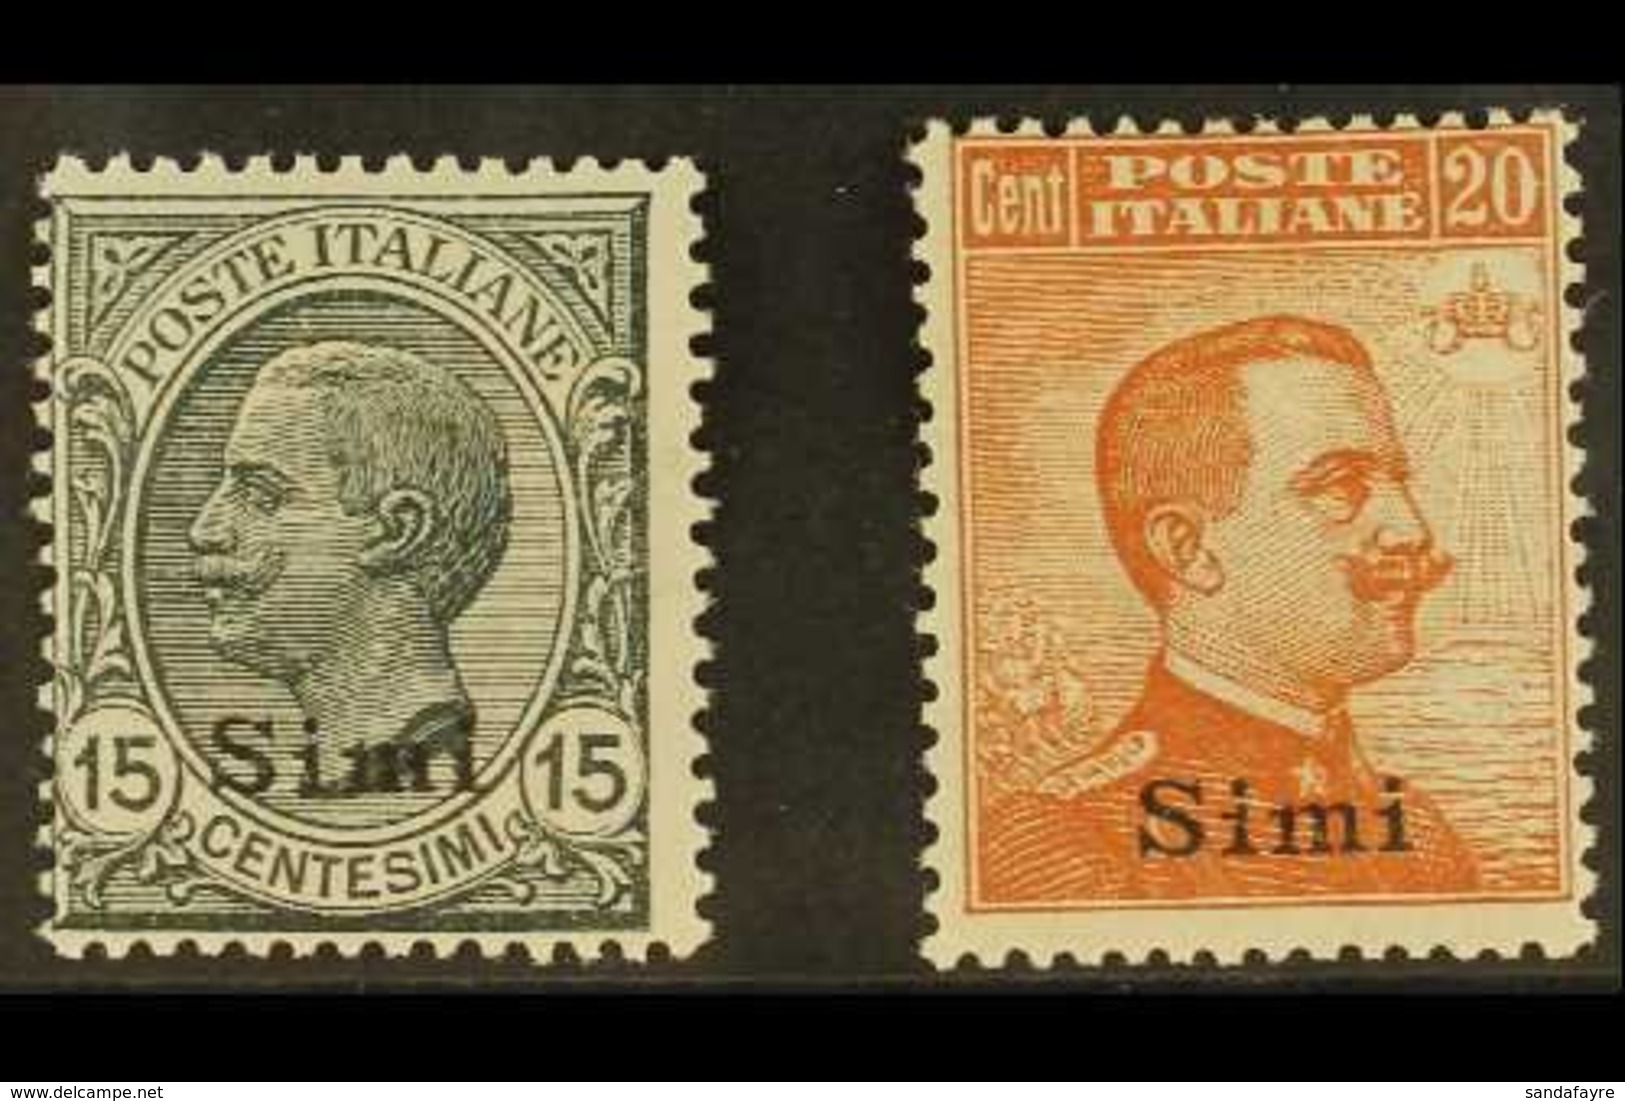 AEGEAN IS - SIMI 1921 - 2 15c Grey And 20c Orange With Wmk, Sass 10/11, Fine Mint. (2 Stamps) For More Images, Please Vi - Other & Unclassified